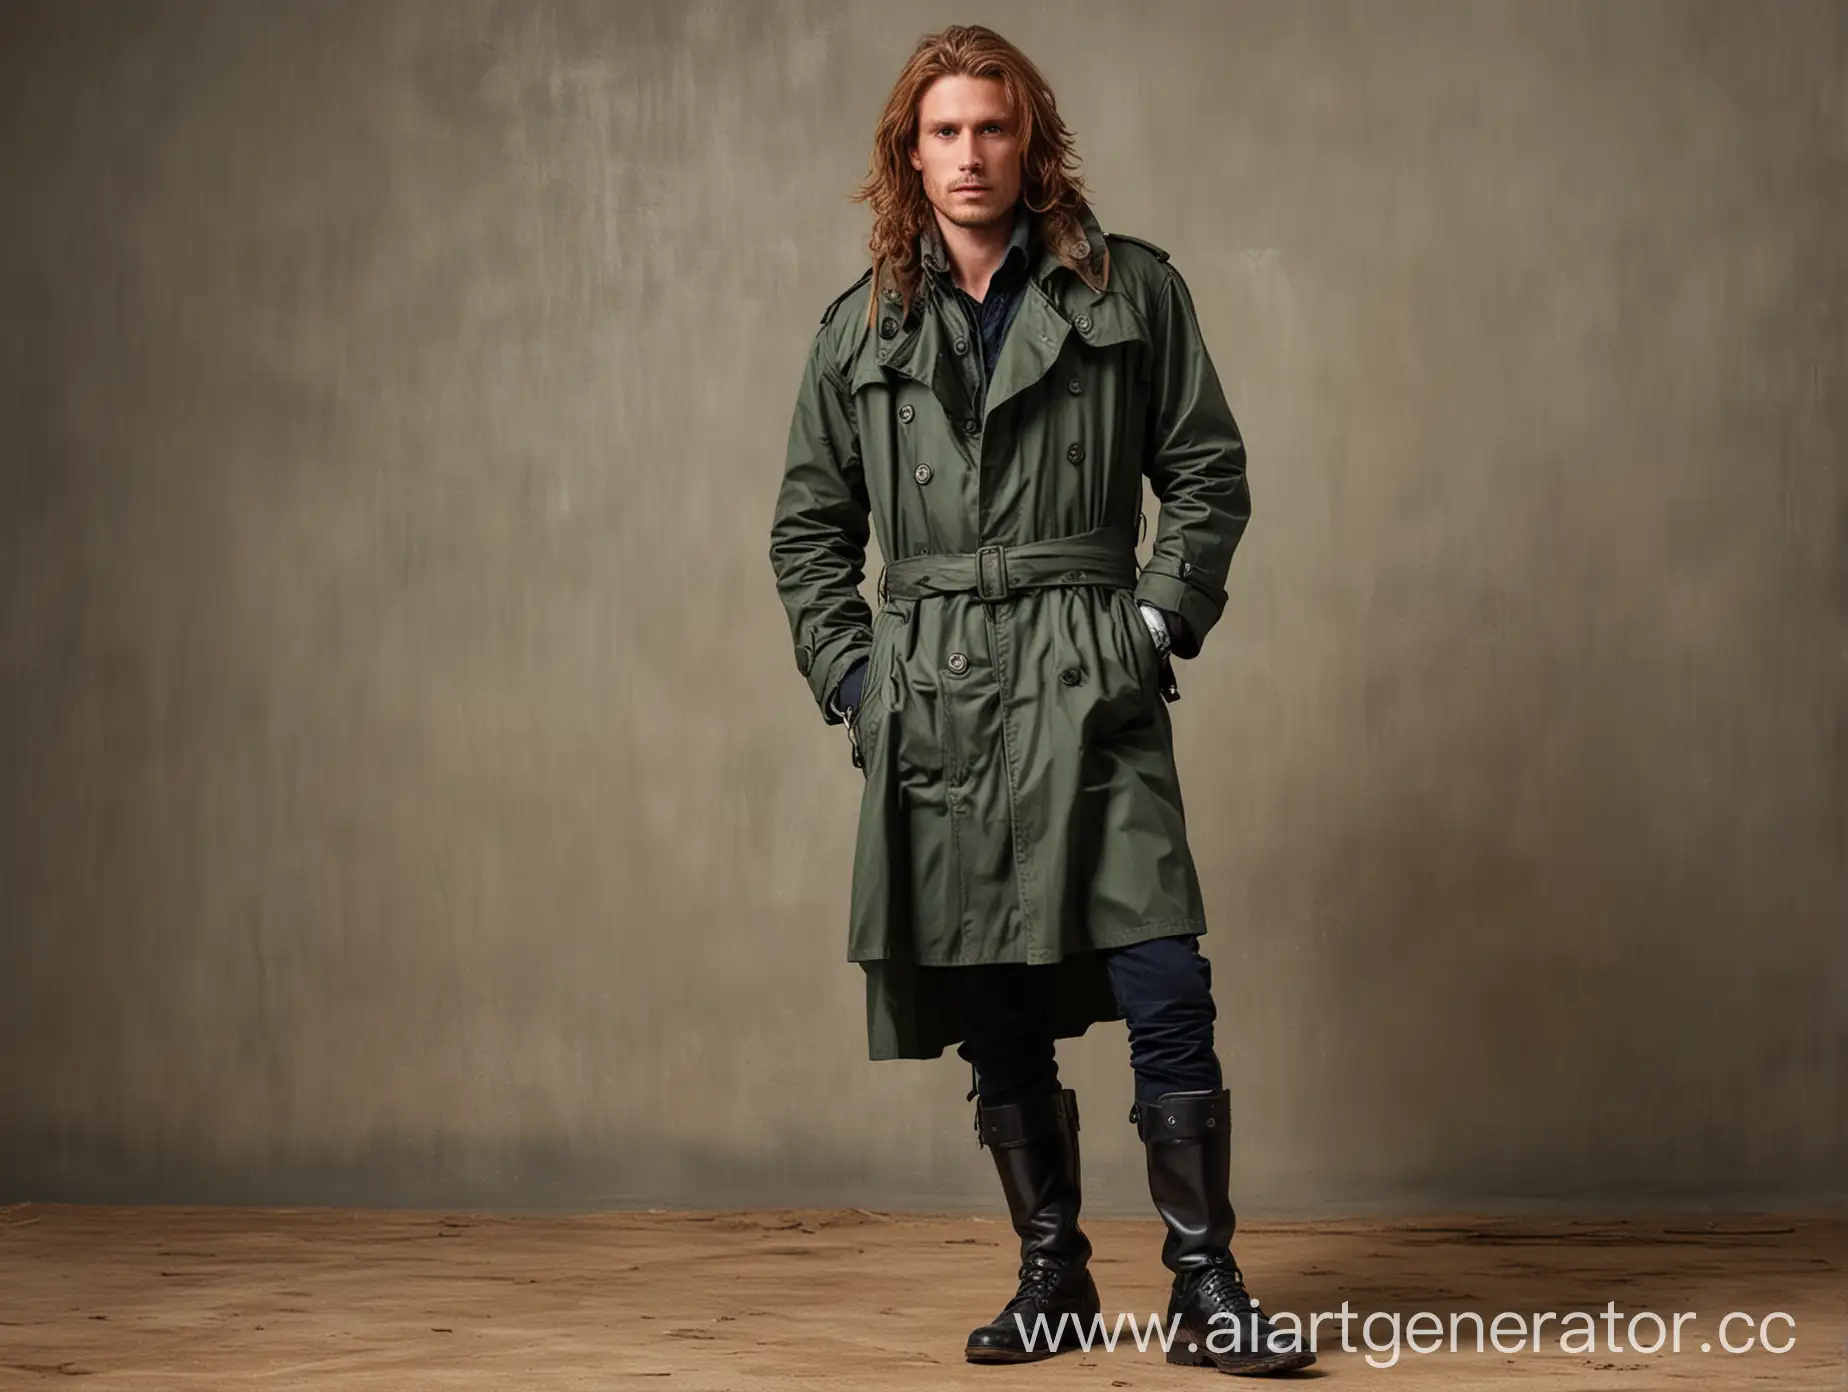 Disheveled-Medium-Height-Man-in-Dark-Green-Trench-Coat-and-Boots